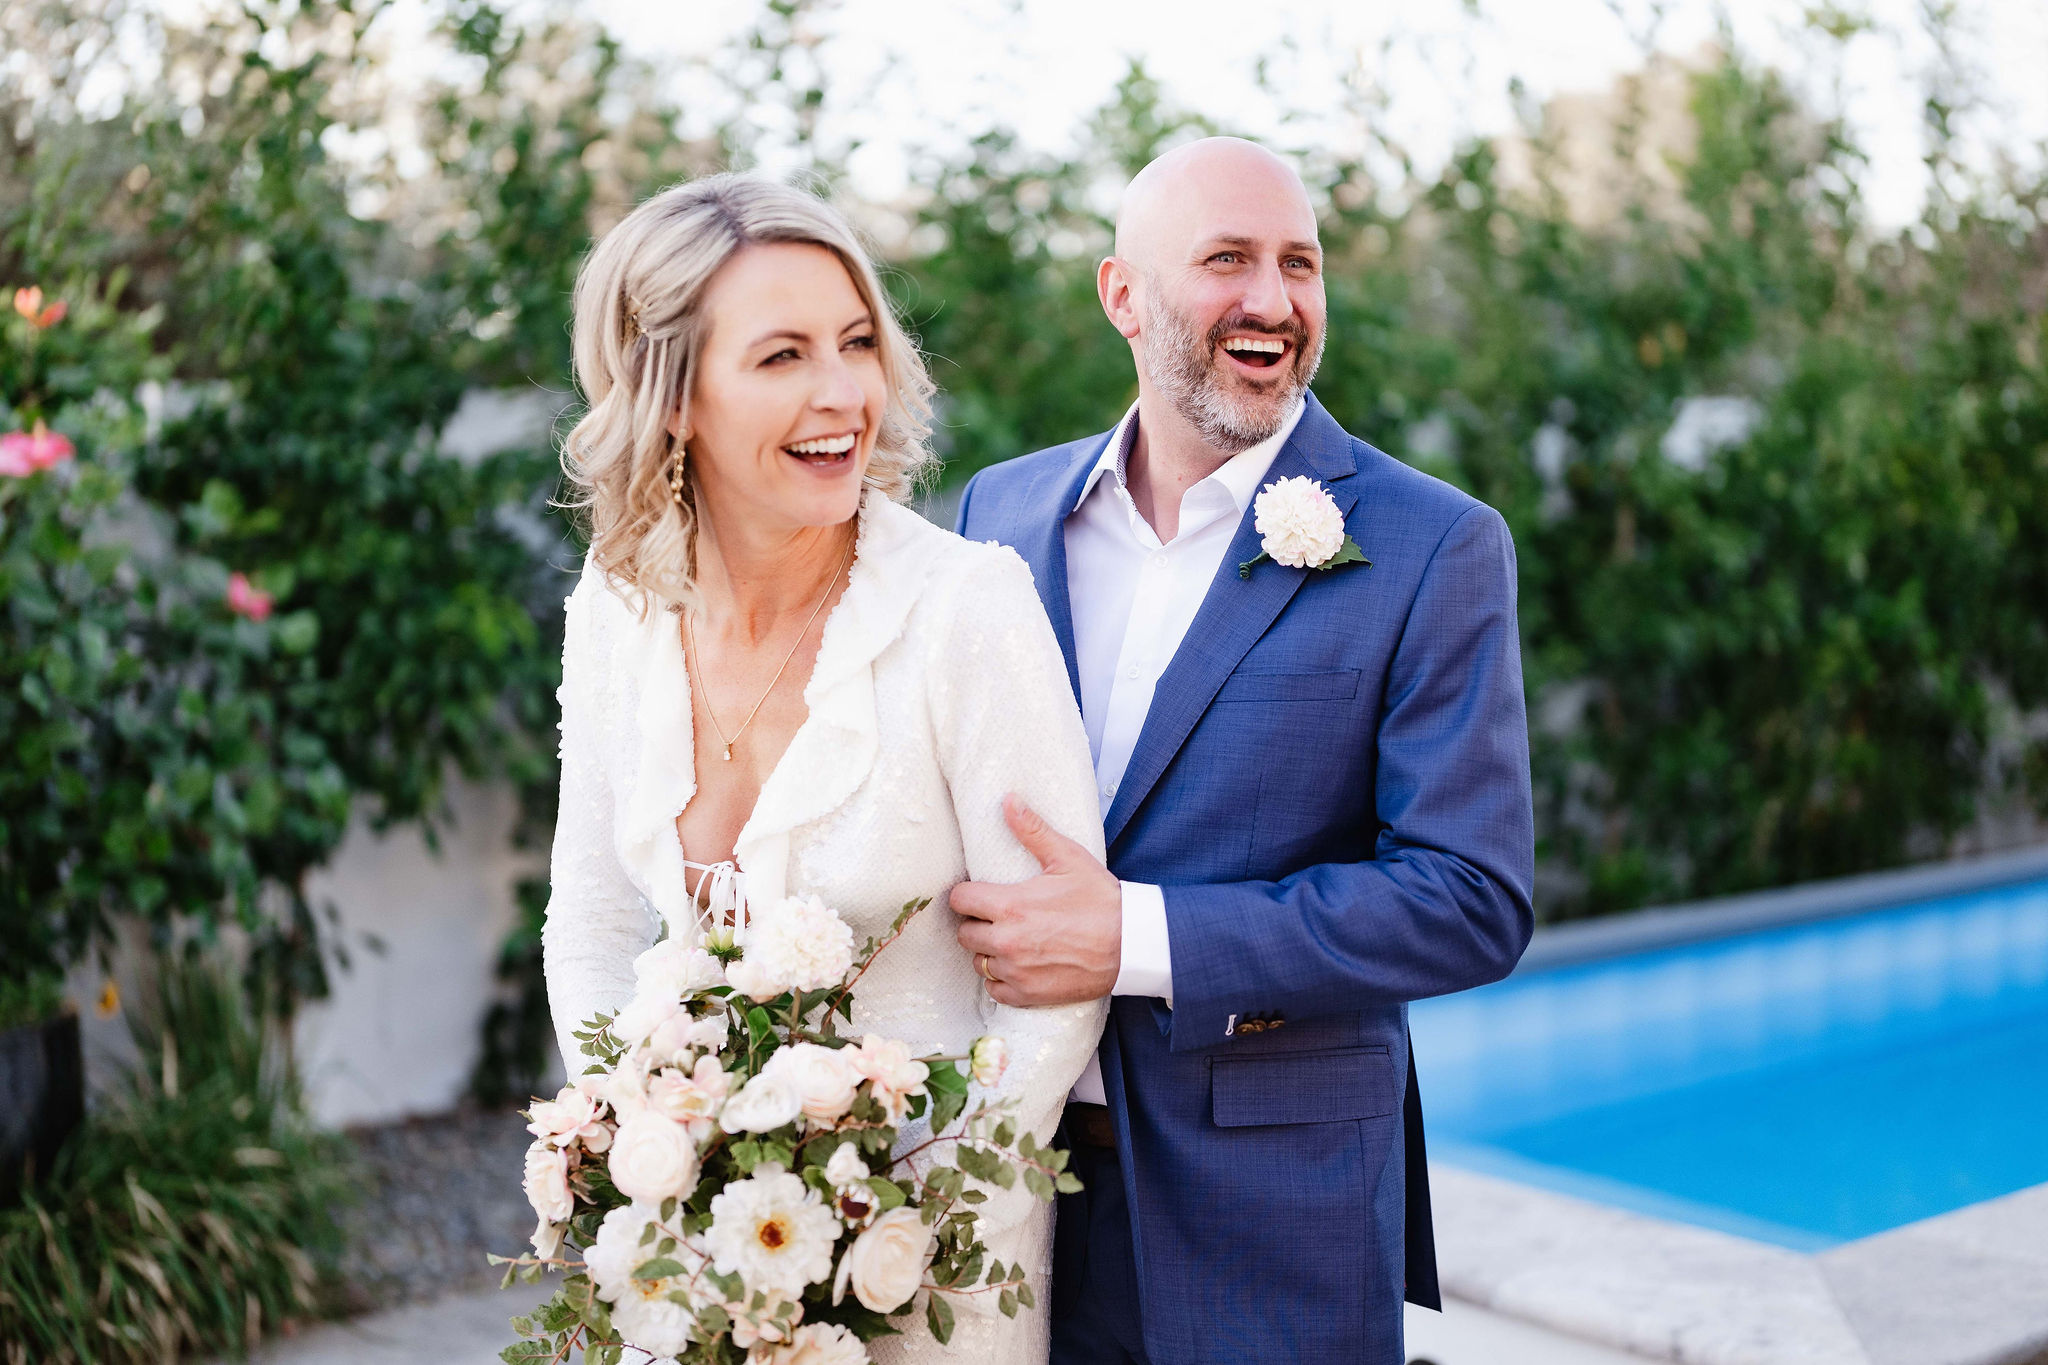 Mike and Chelsea’s Backyard Phoenix Wedding: A Day of Simple Joys